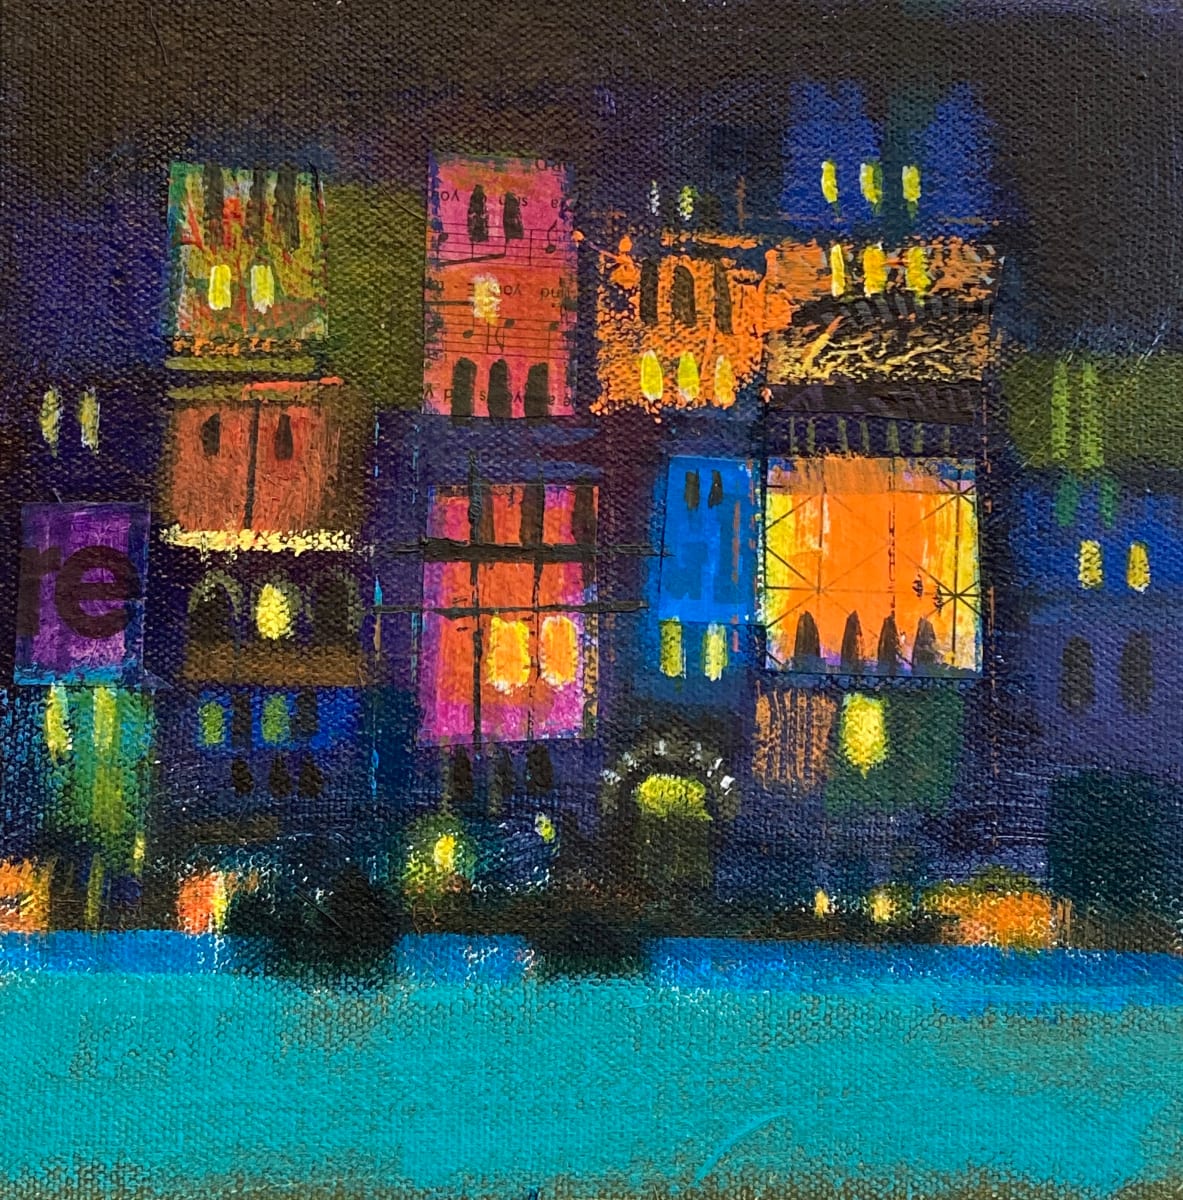 Venice by night by francis boag 